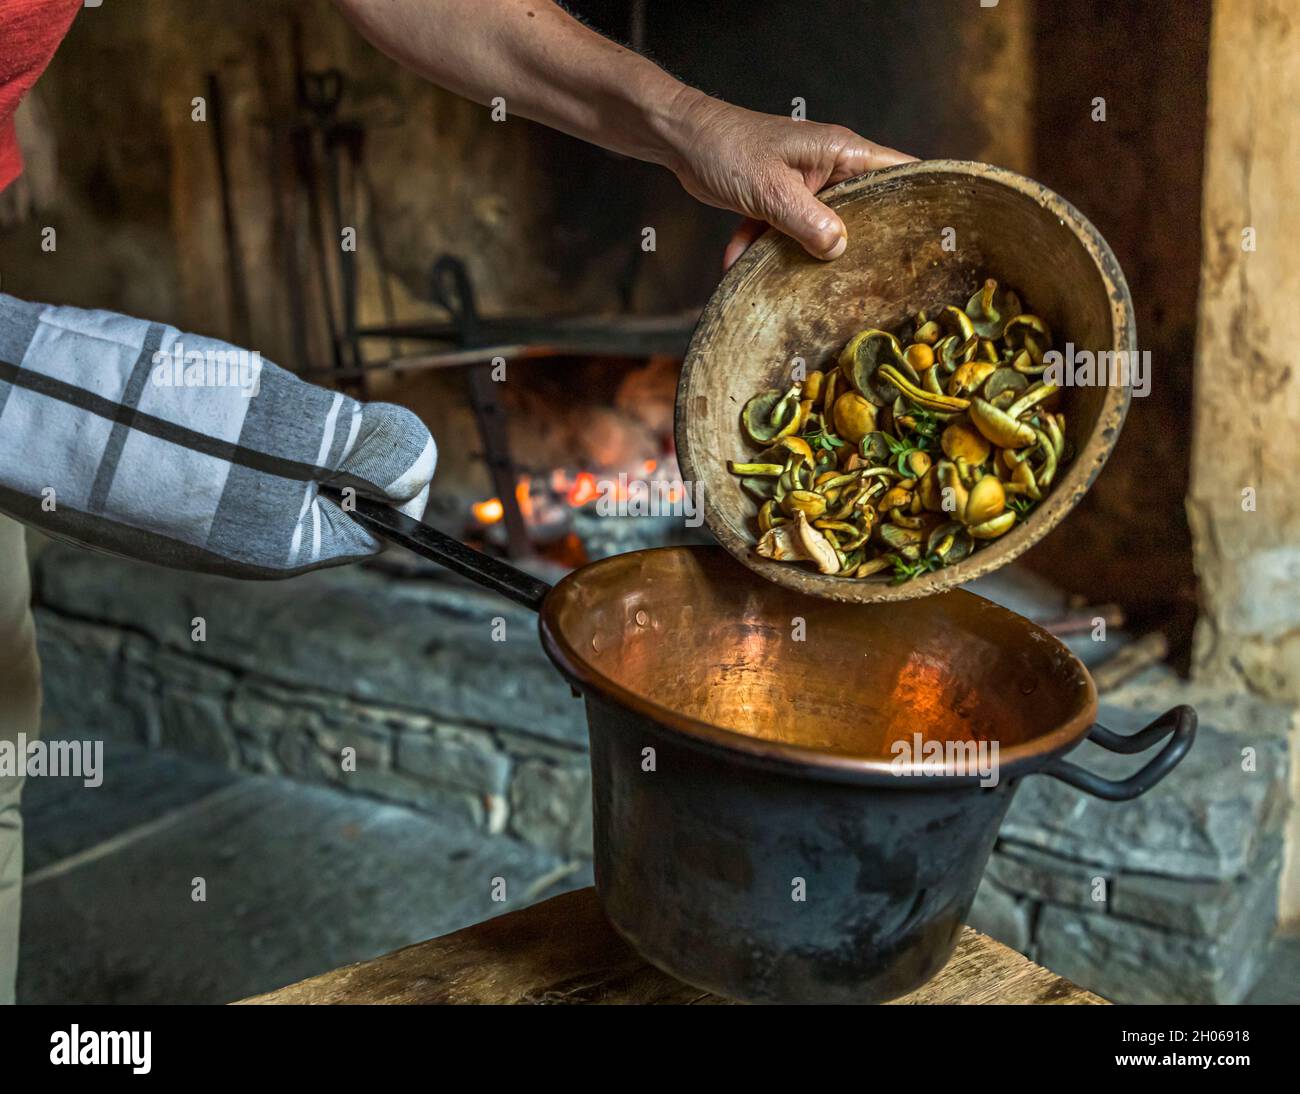 In Cerentino, visitors can stay in the lavishly renovated historic patrician house Cà Vegia, with centuries-old original furnishings but without electricity. With a little fat, self-collected mushrooms are sauteed over the fire, Circolo della Rovana, Switzerland Stock Photo